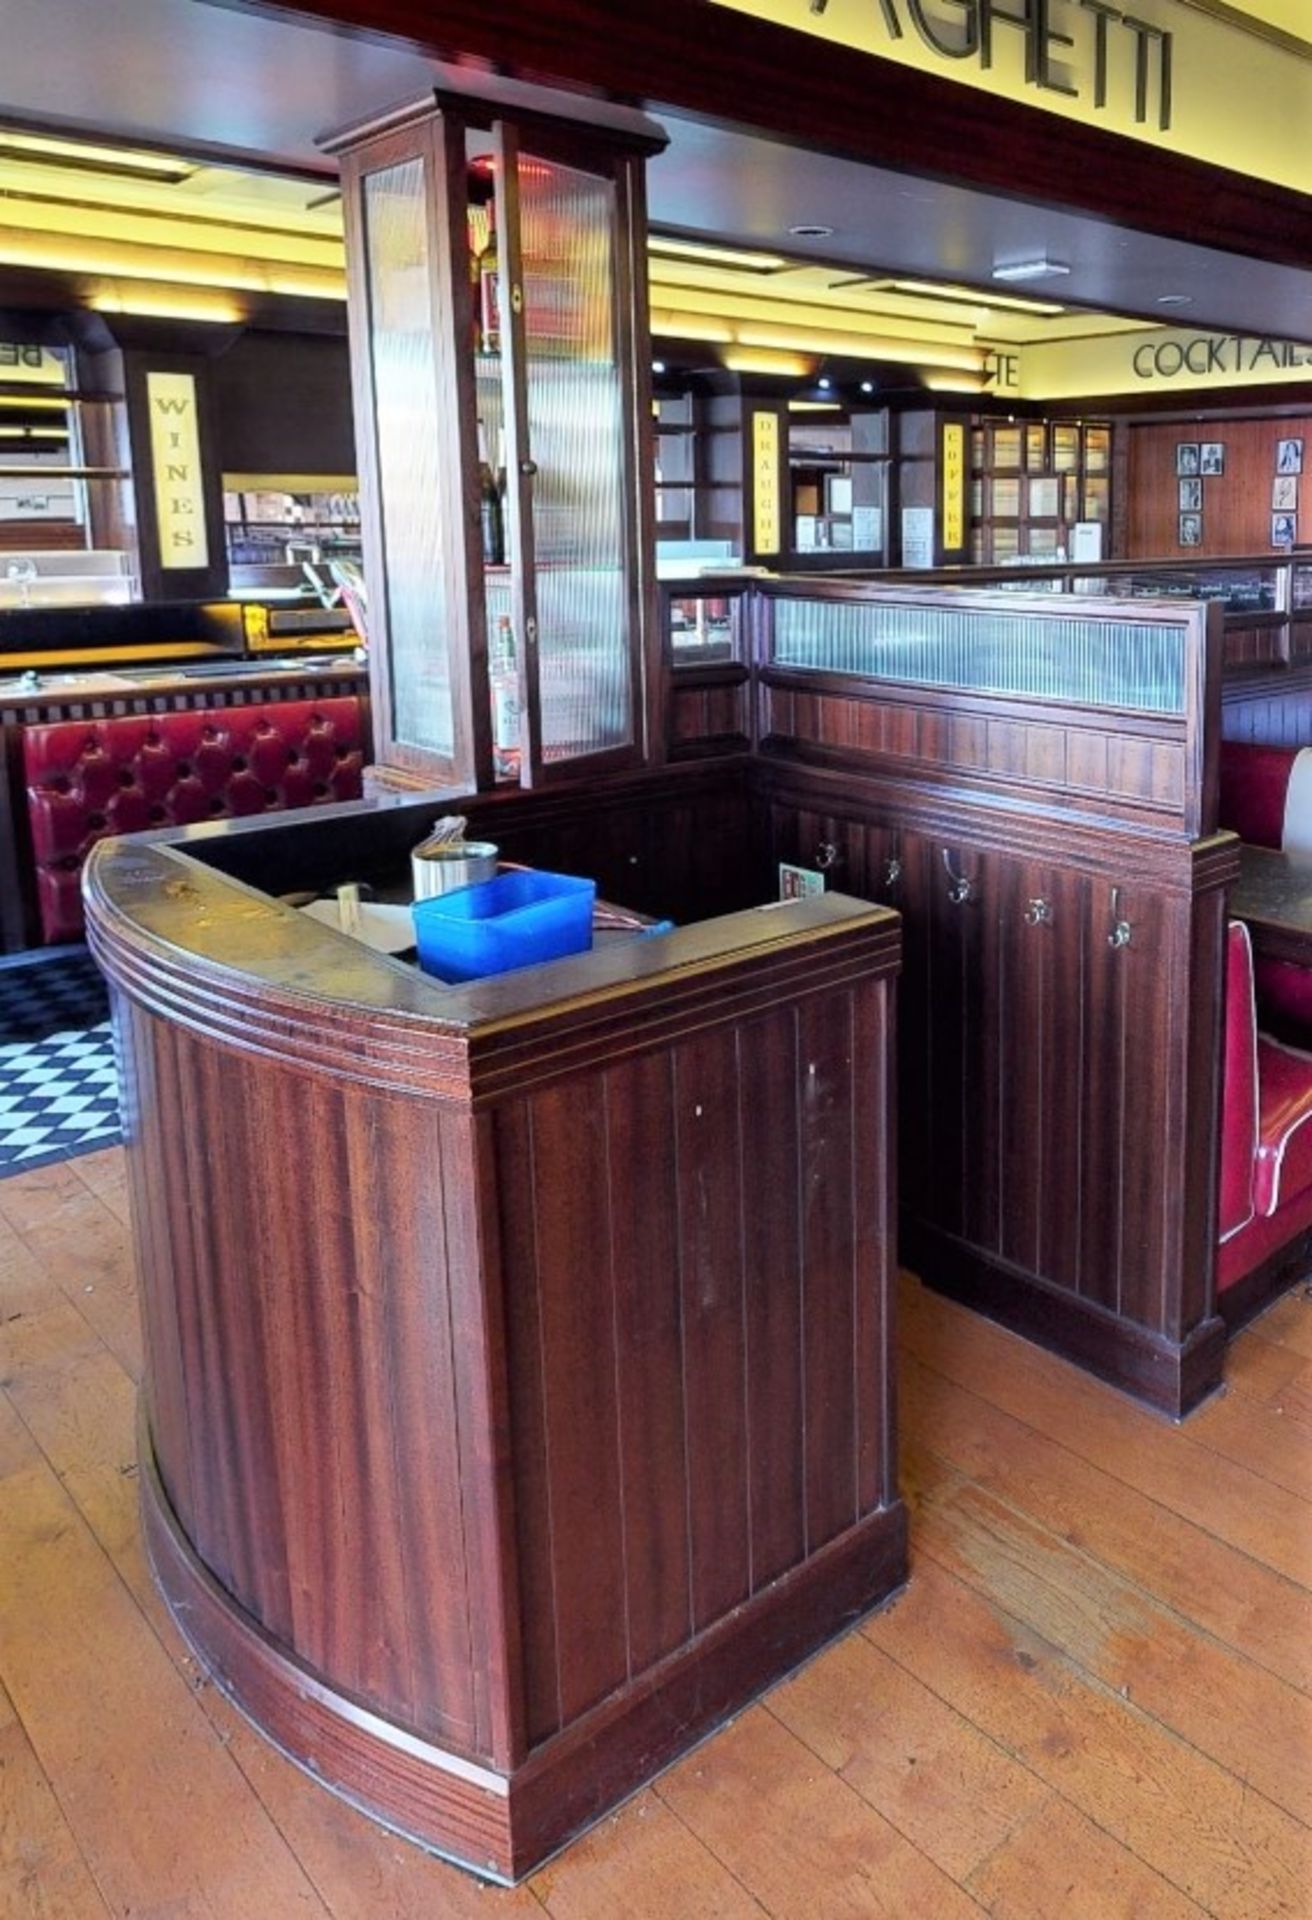 1 x Front of House Restaurant Reception Counter With Upright Wine Bottle Display Cabinet - CL779 - - Image 2 of 4